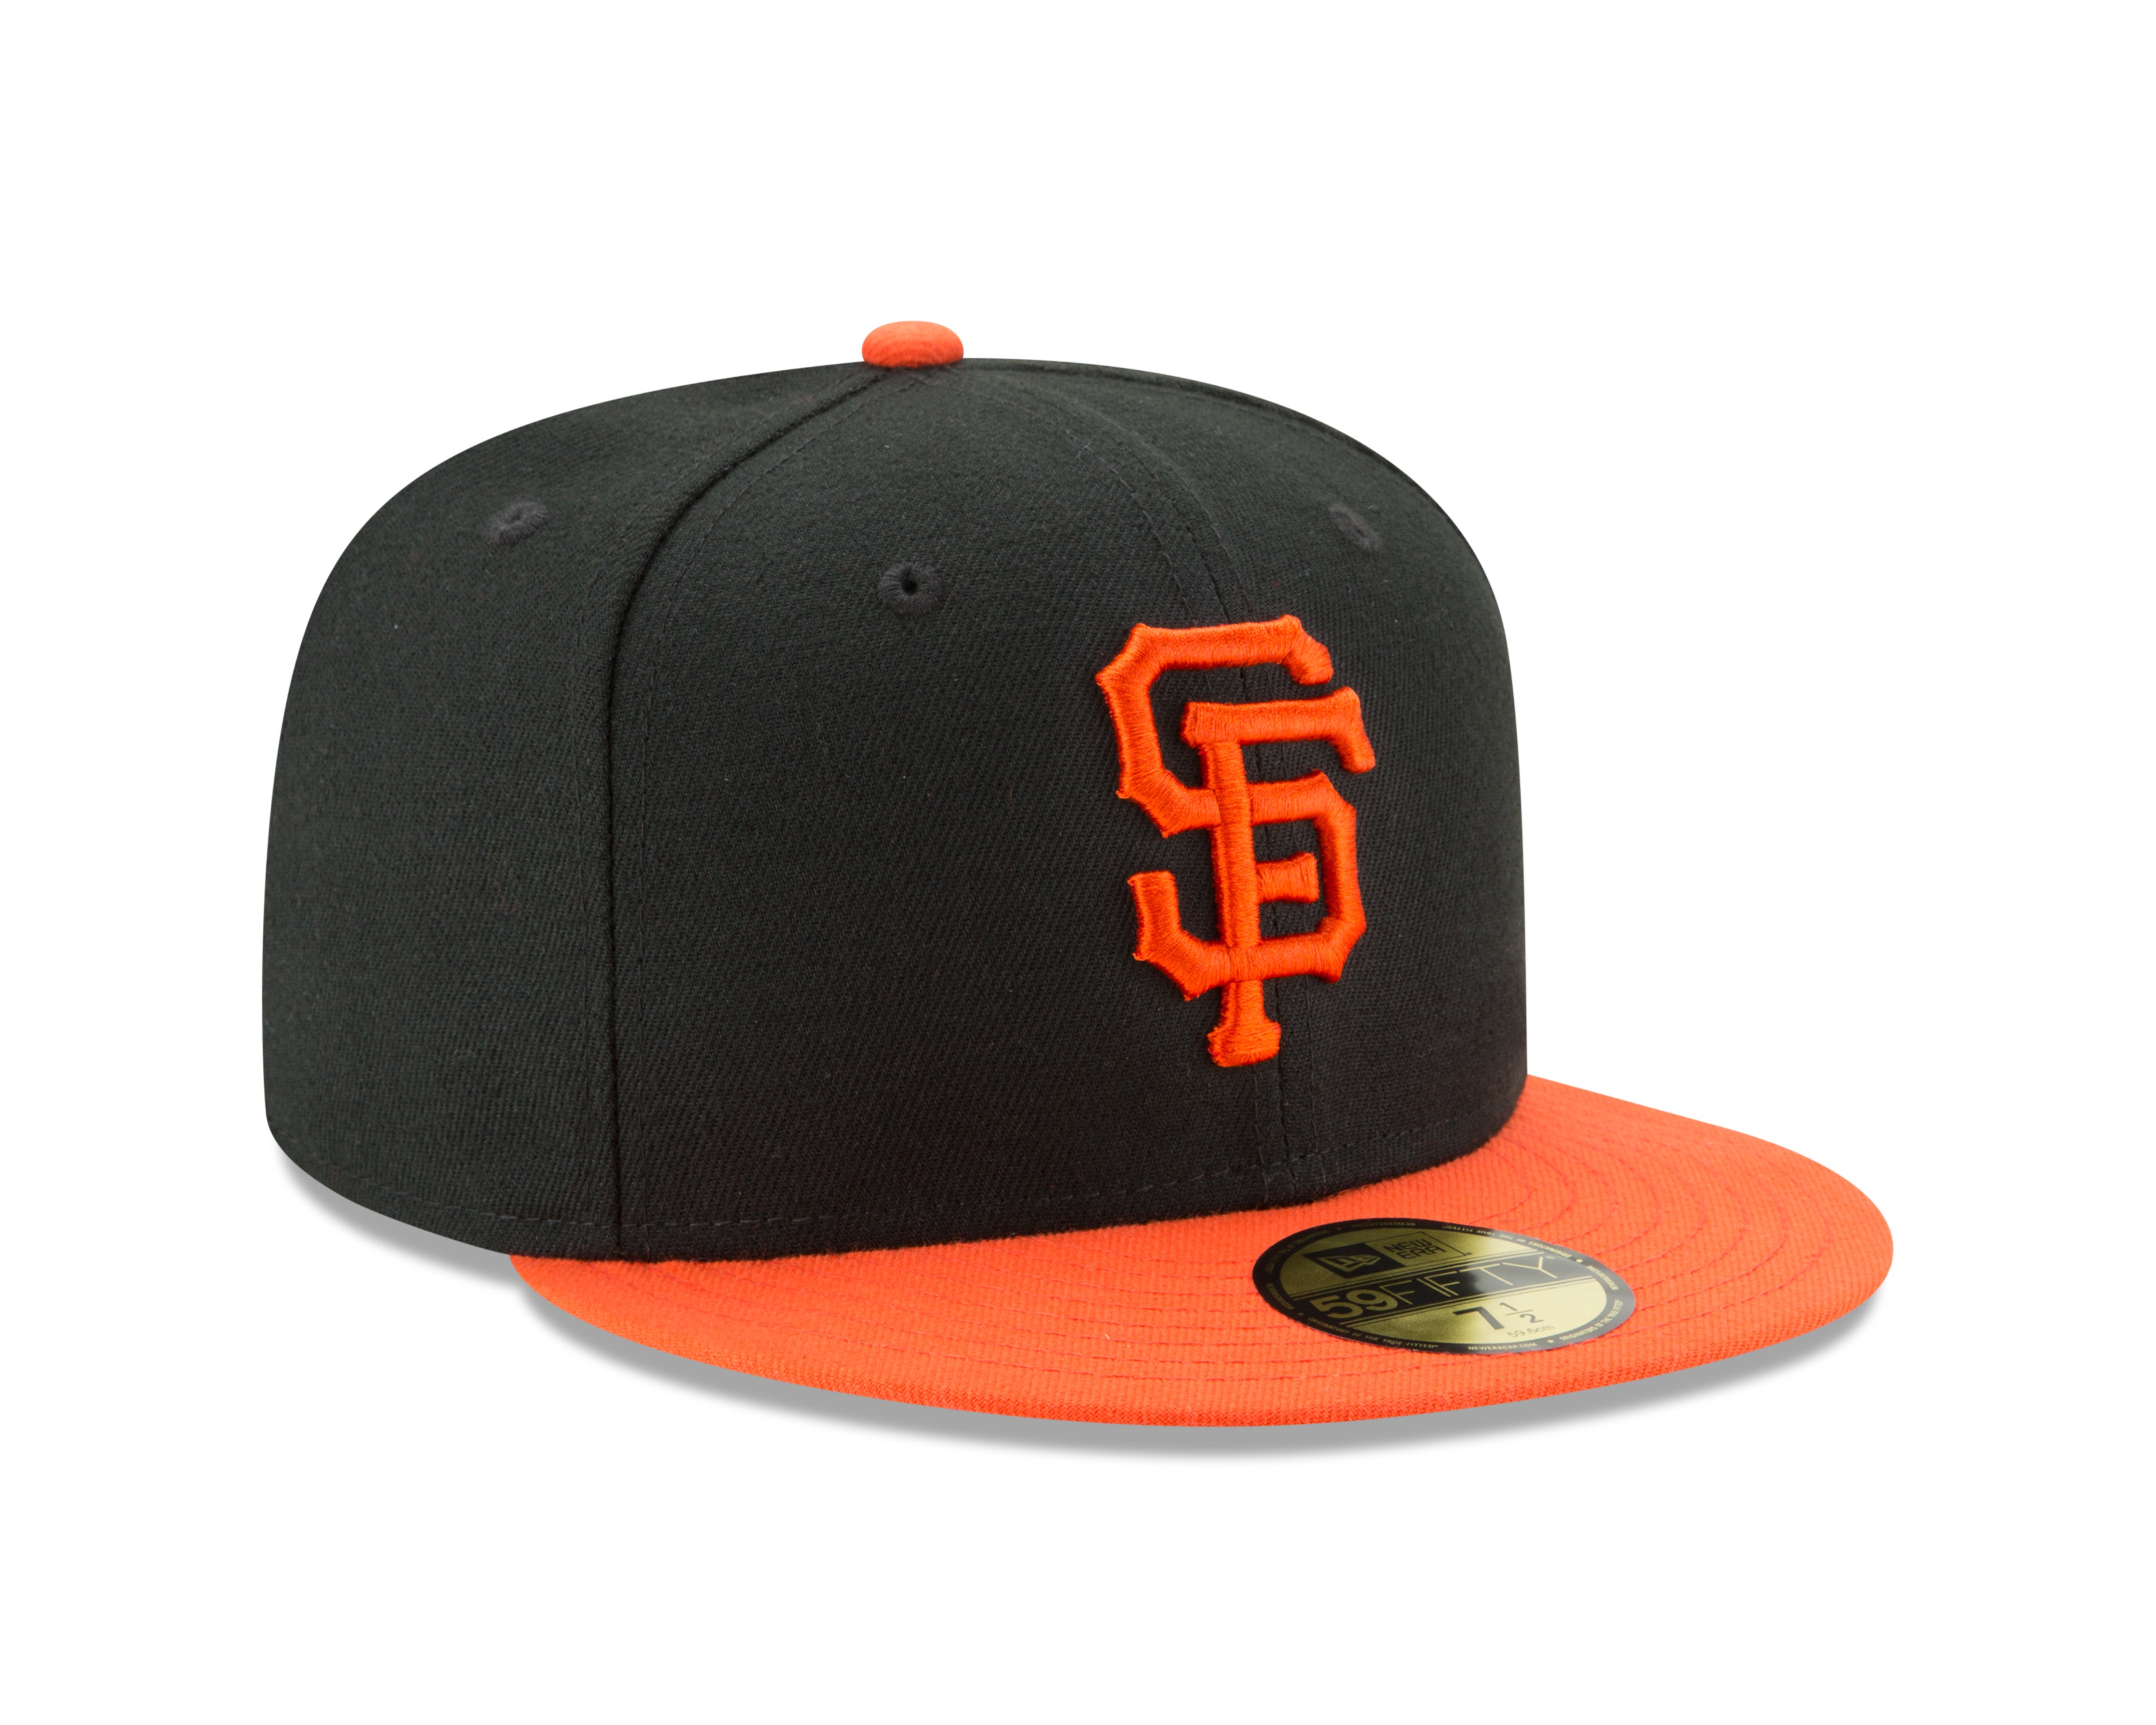 San Francisco Giants New Era Authentic Collection On-Field 59FIFTY Fitted Hat - Black/Orange, Size: 7 3/4